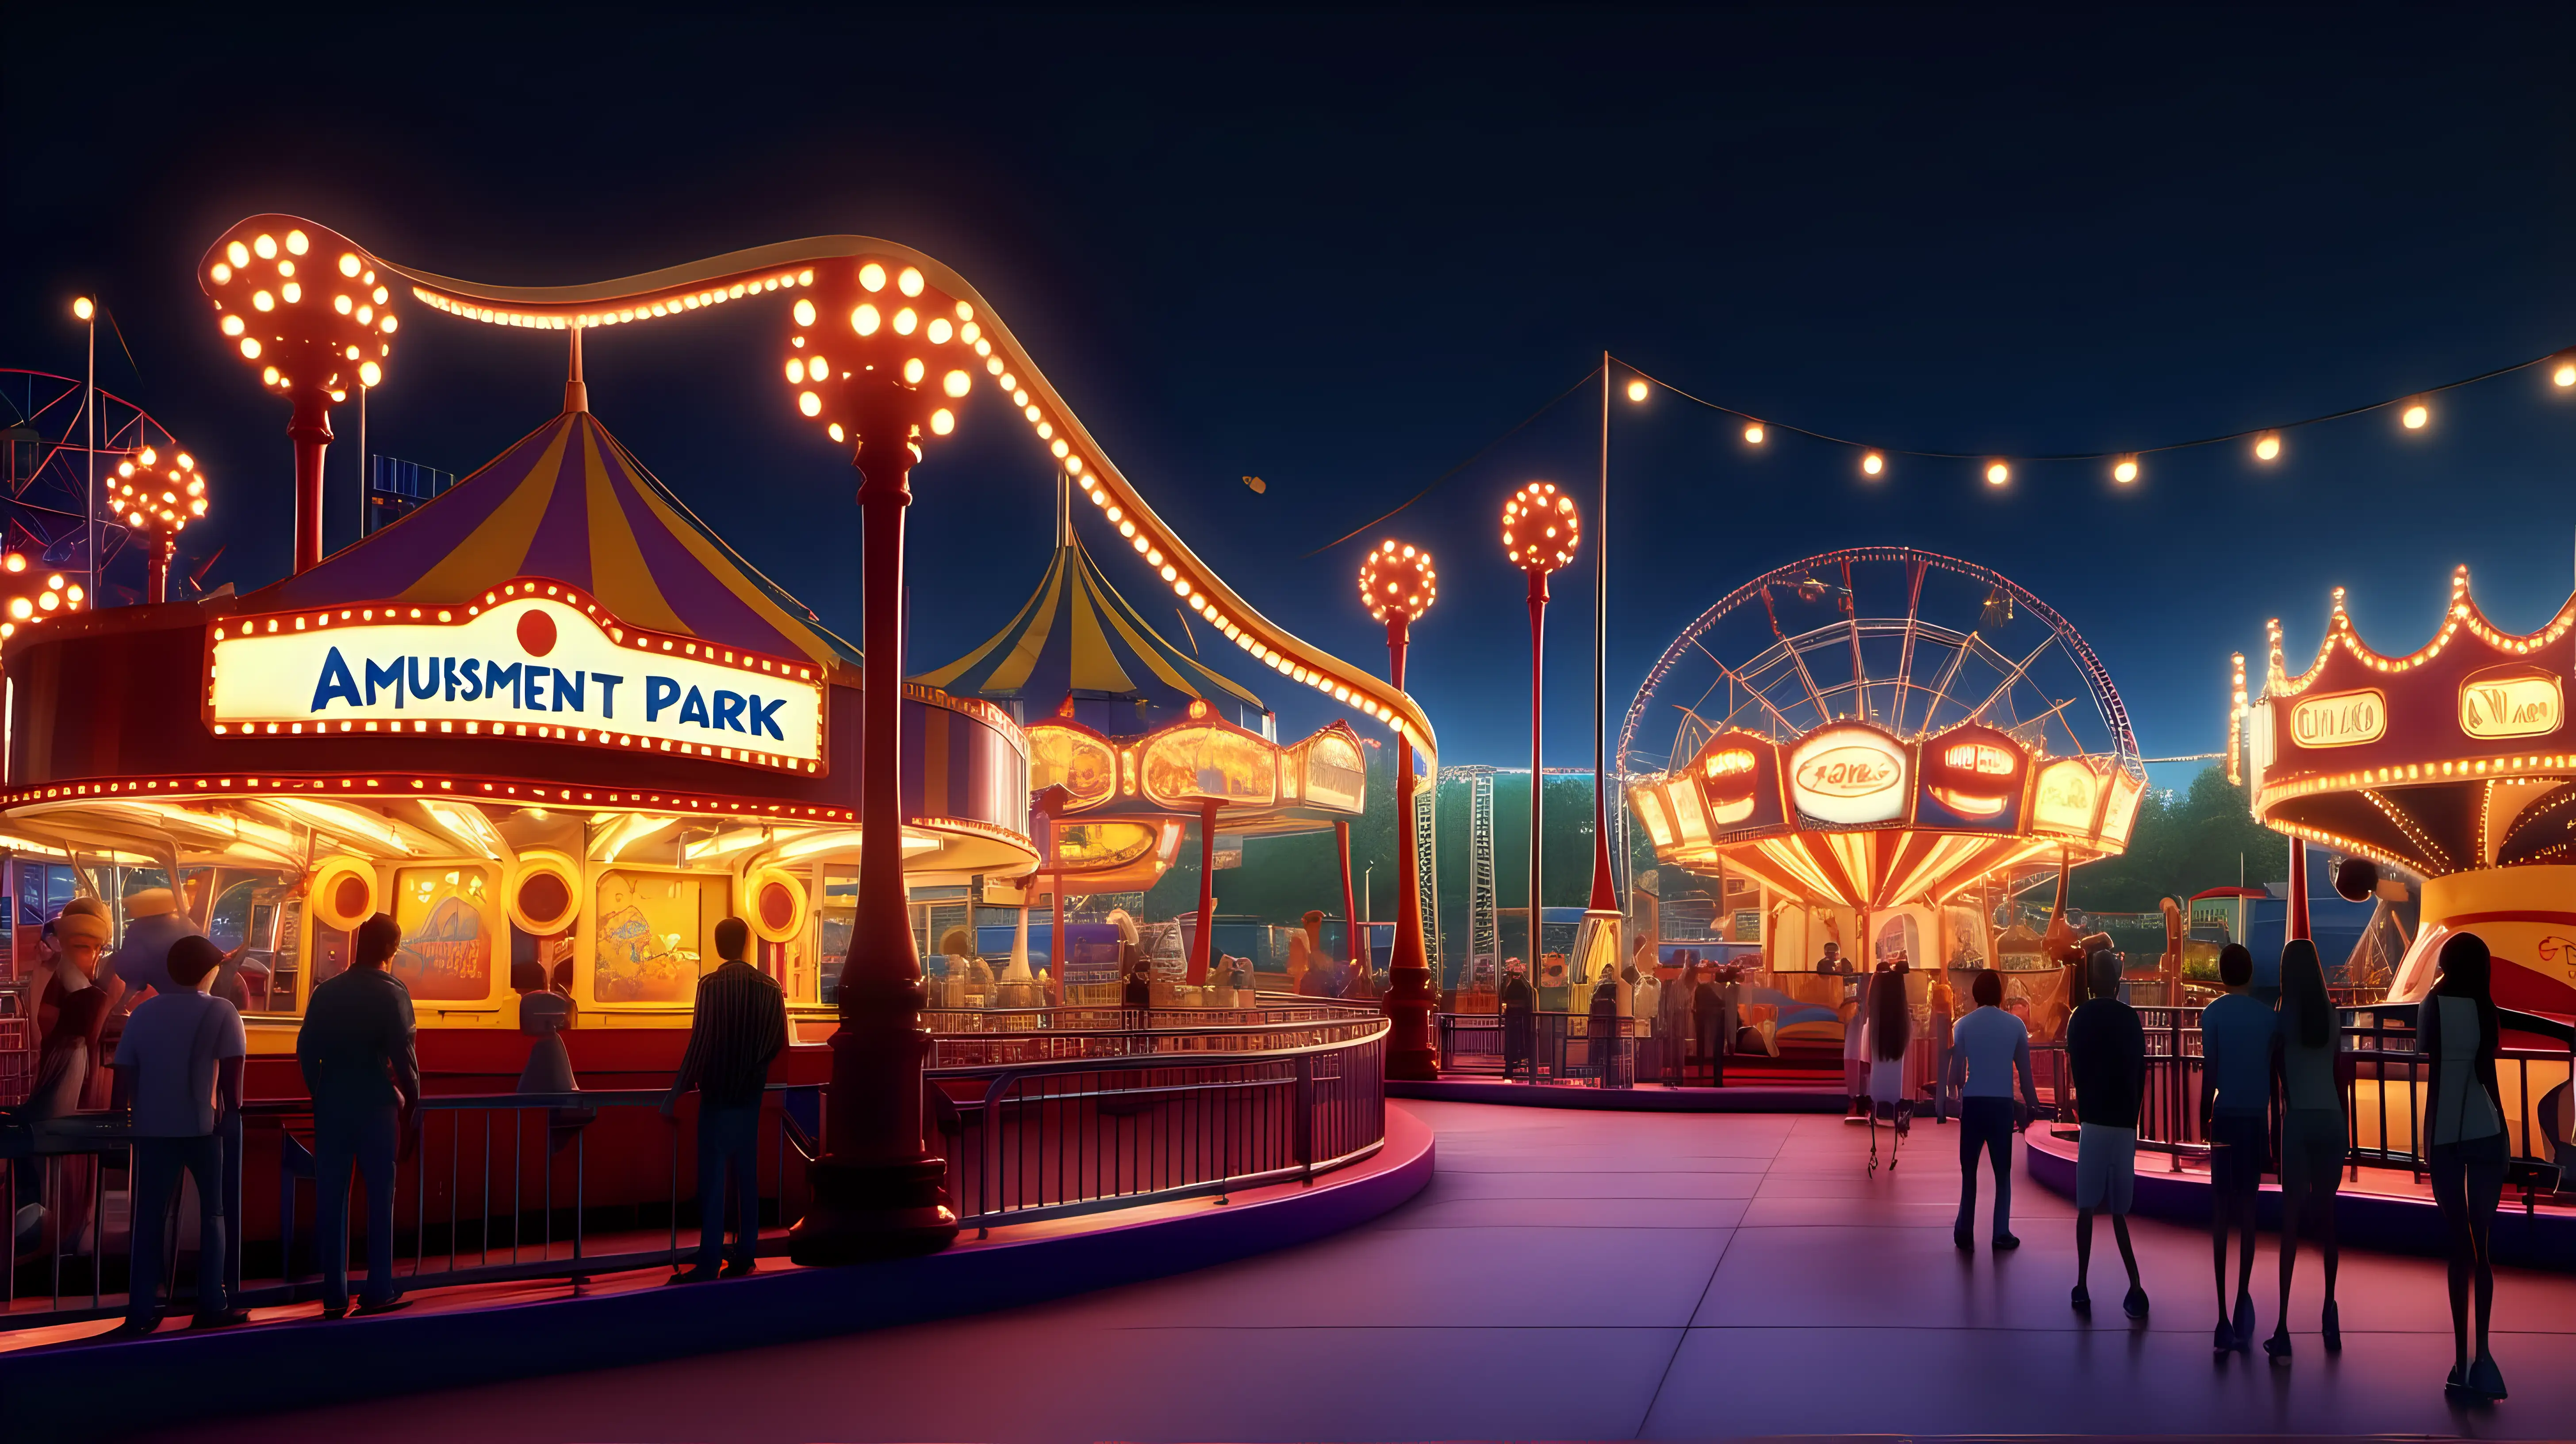 amusement park with stands at night pixar style